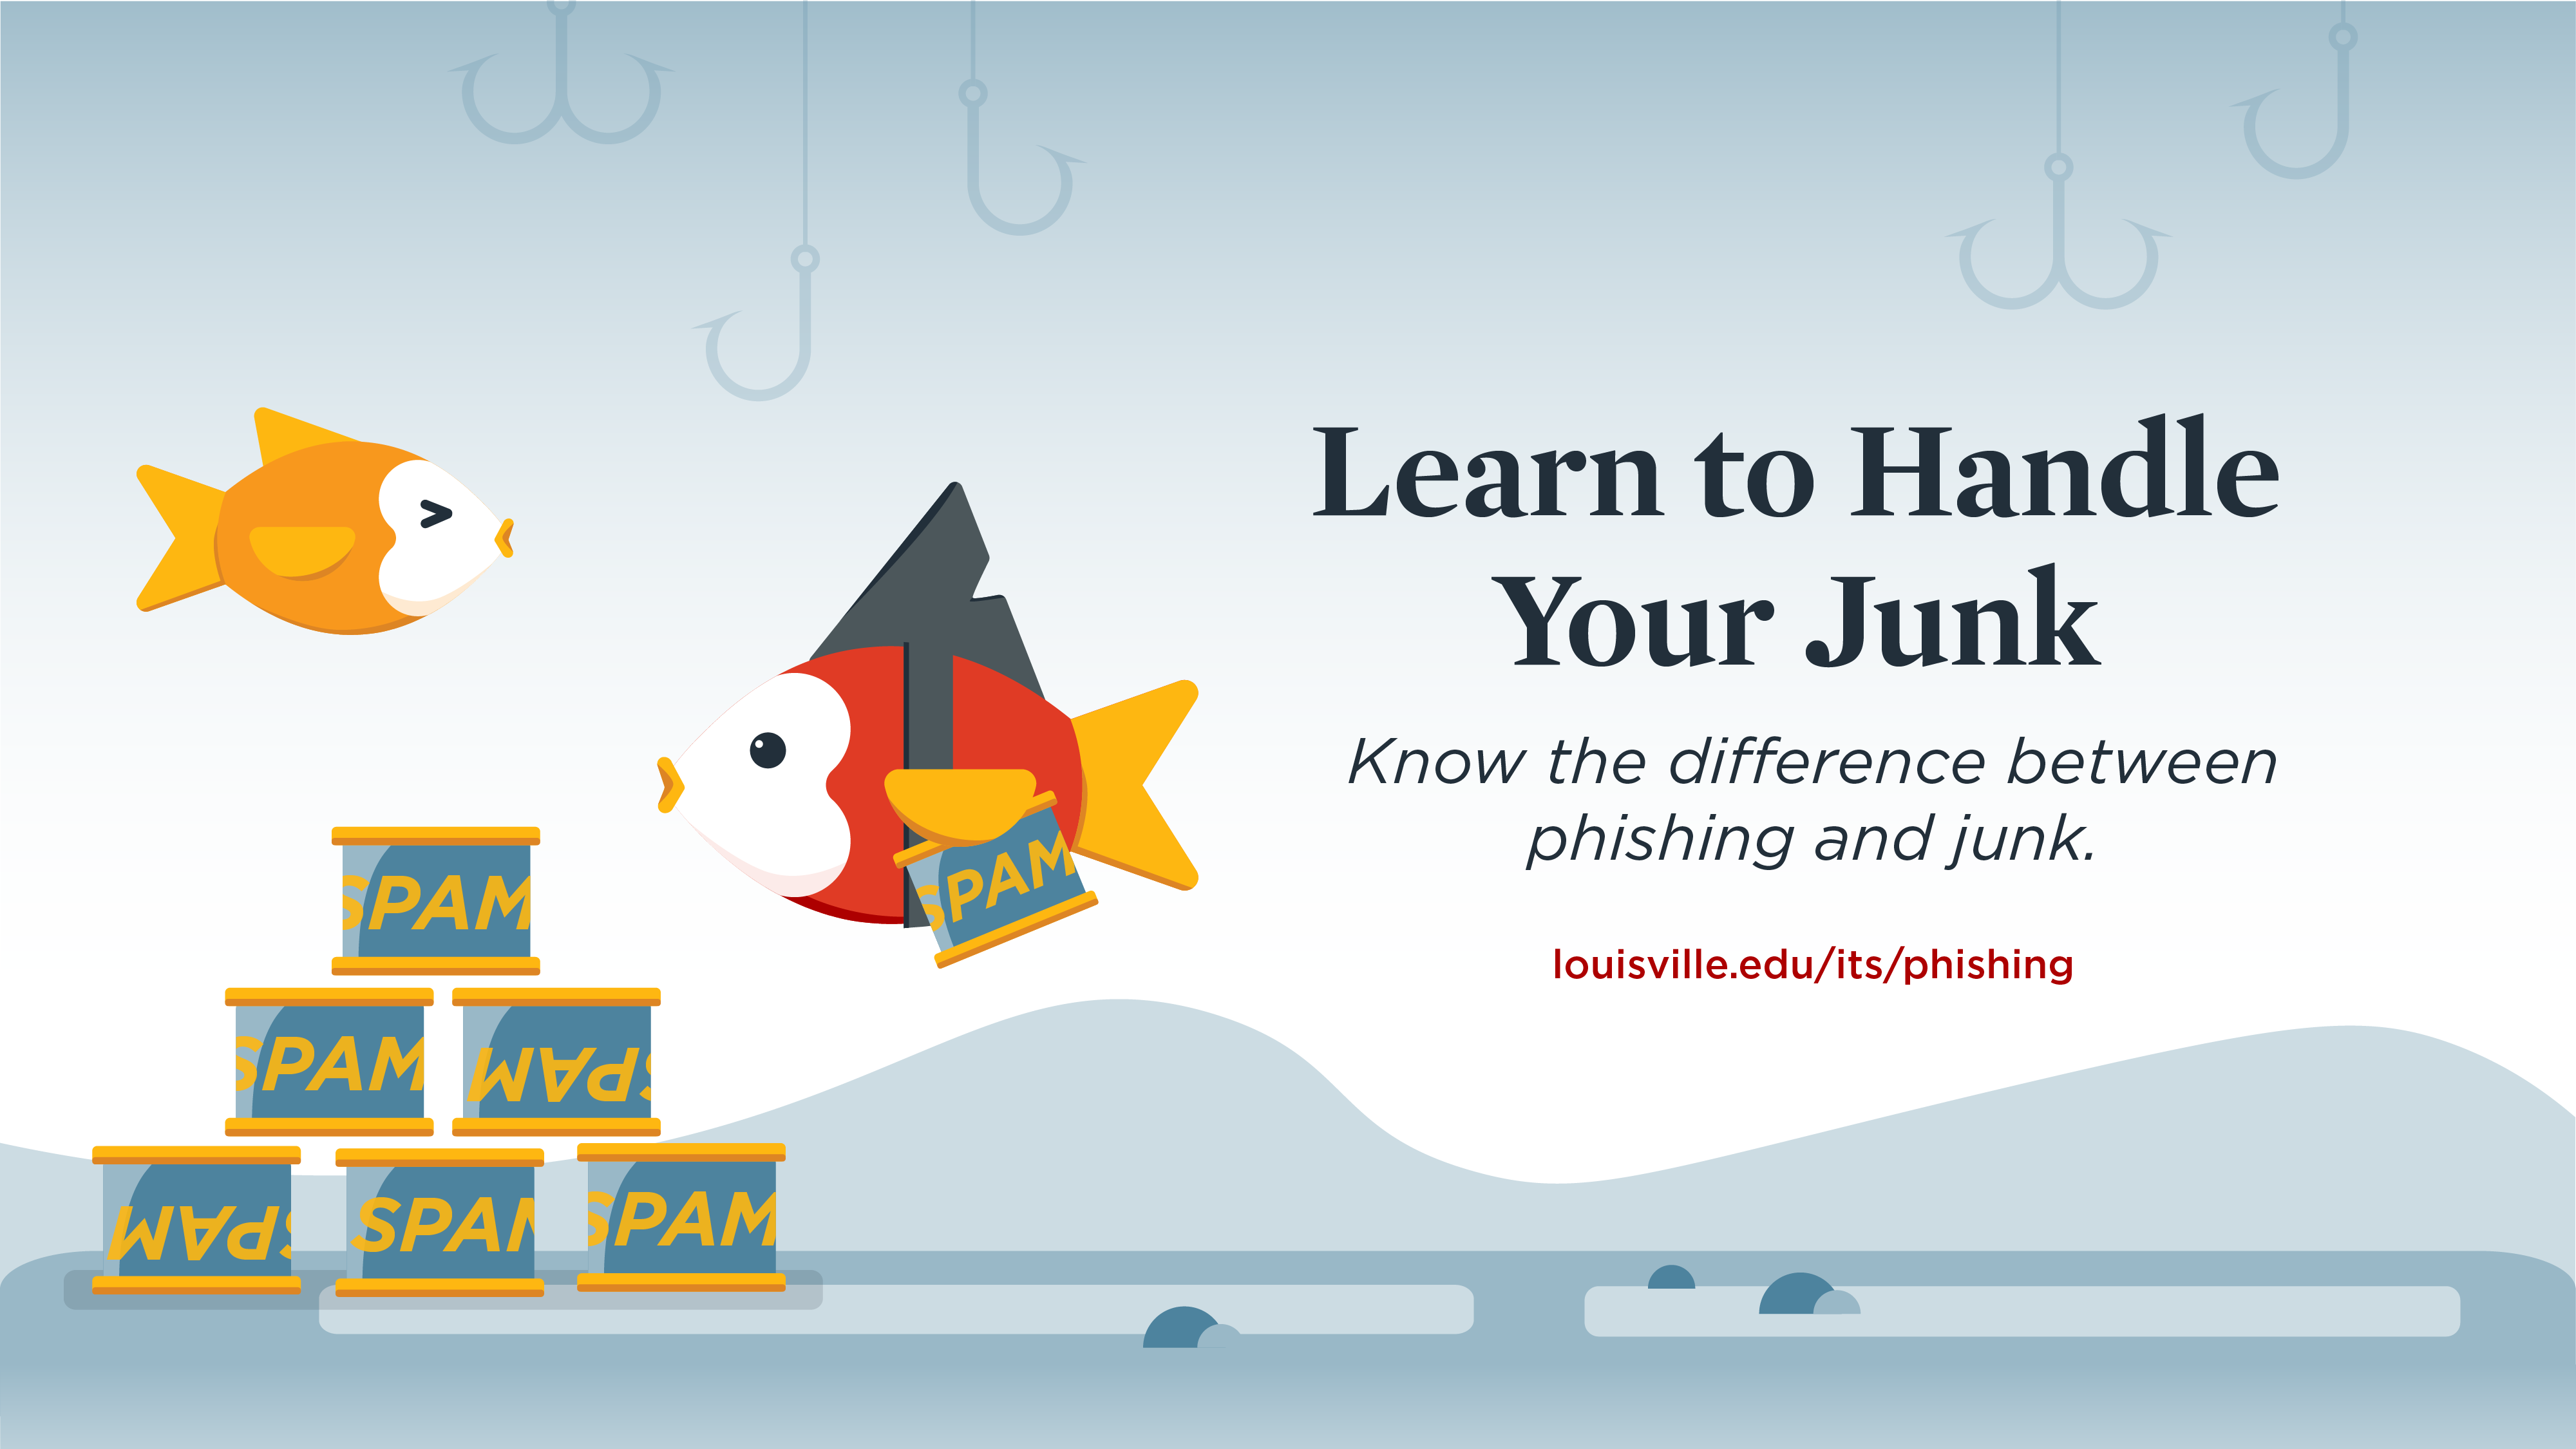 learn to handle your junk, know the difference between phishing and junk